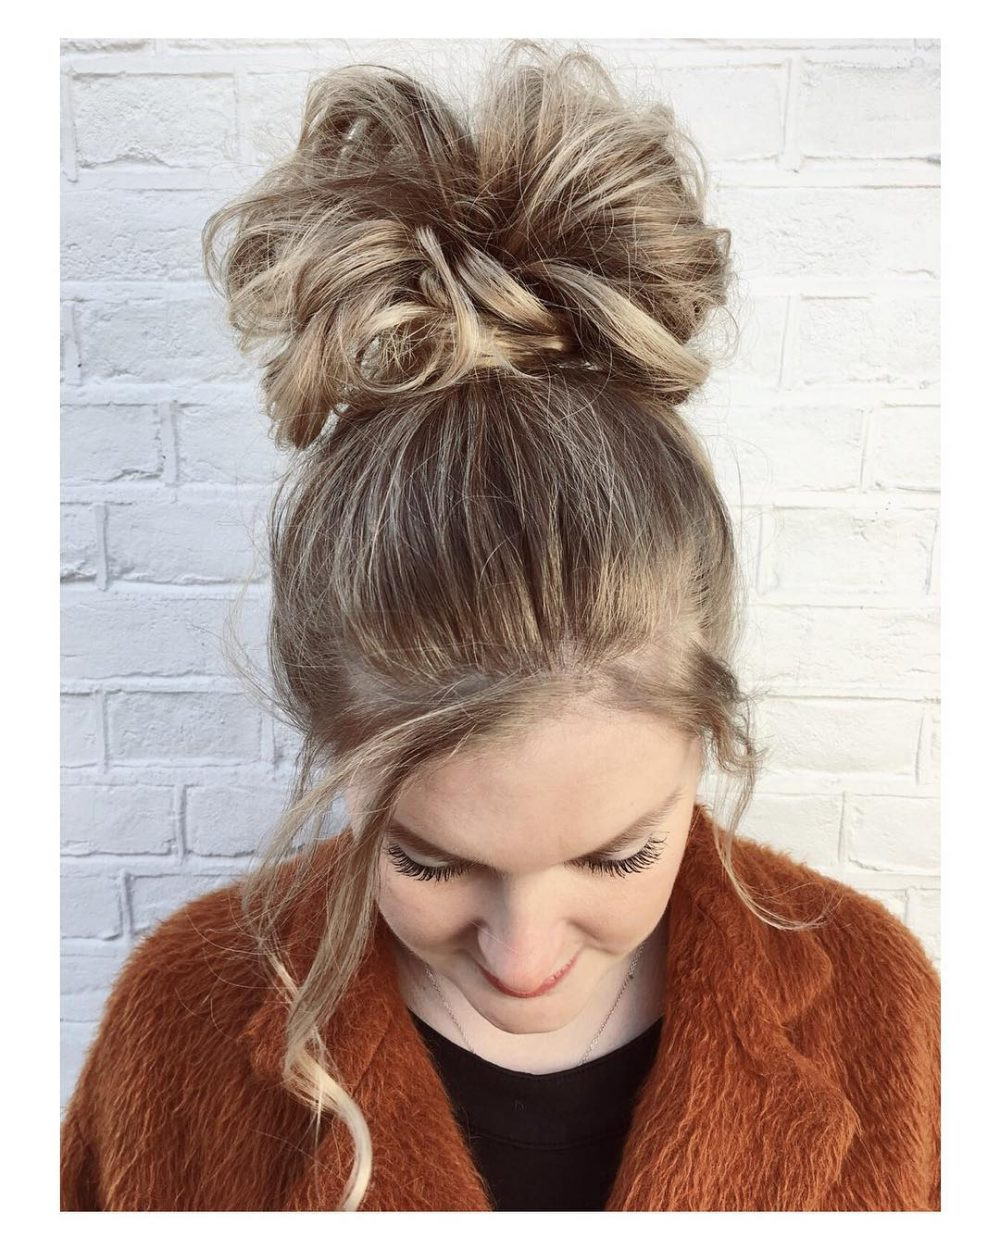 Simple Updo Hairstyles
 Easy Up Dos For Long Hair